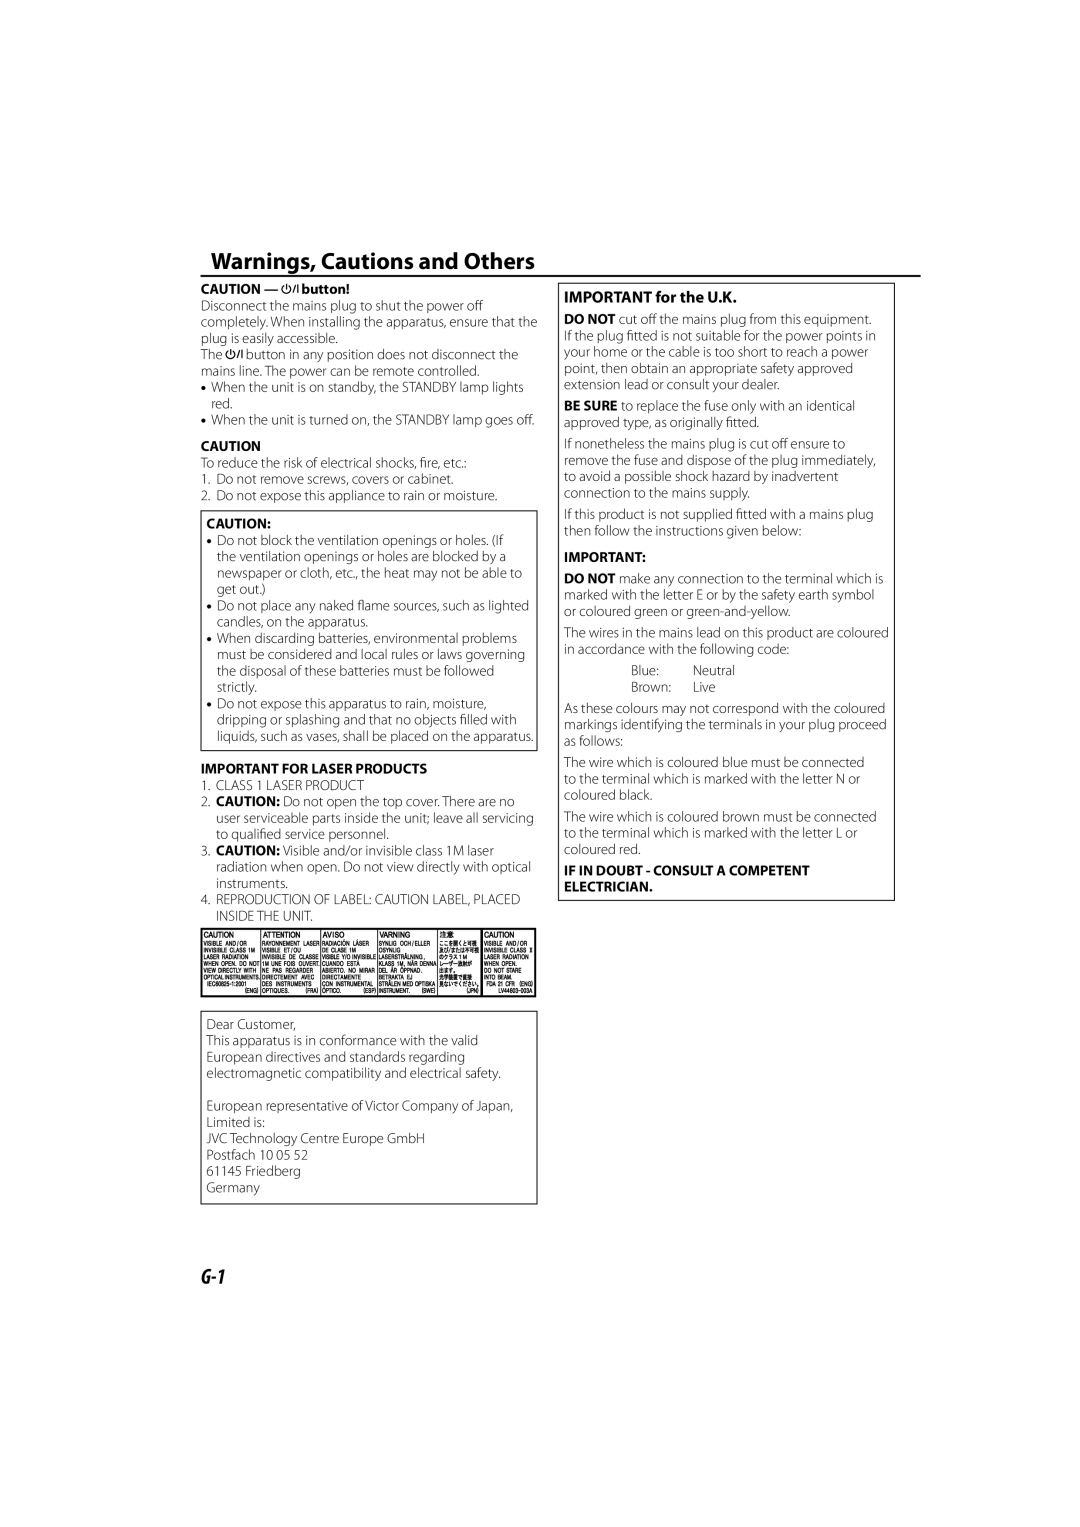 JVC GNT0065-025A manual Warnings, Cautions and Others, CAUTION - button, Important For Laser Products 